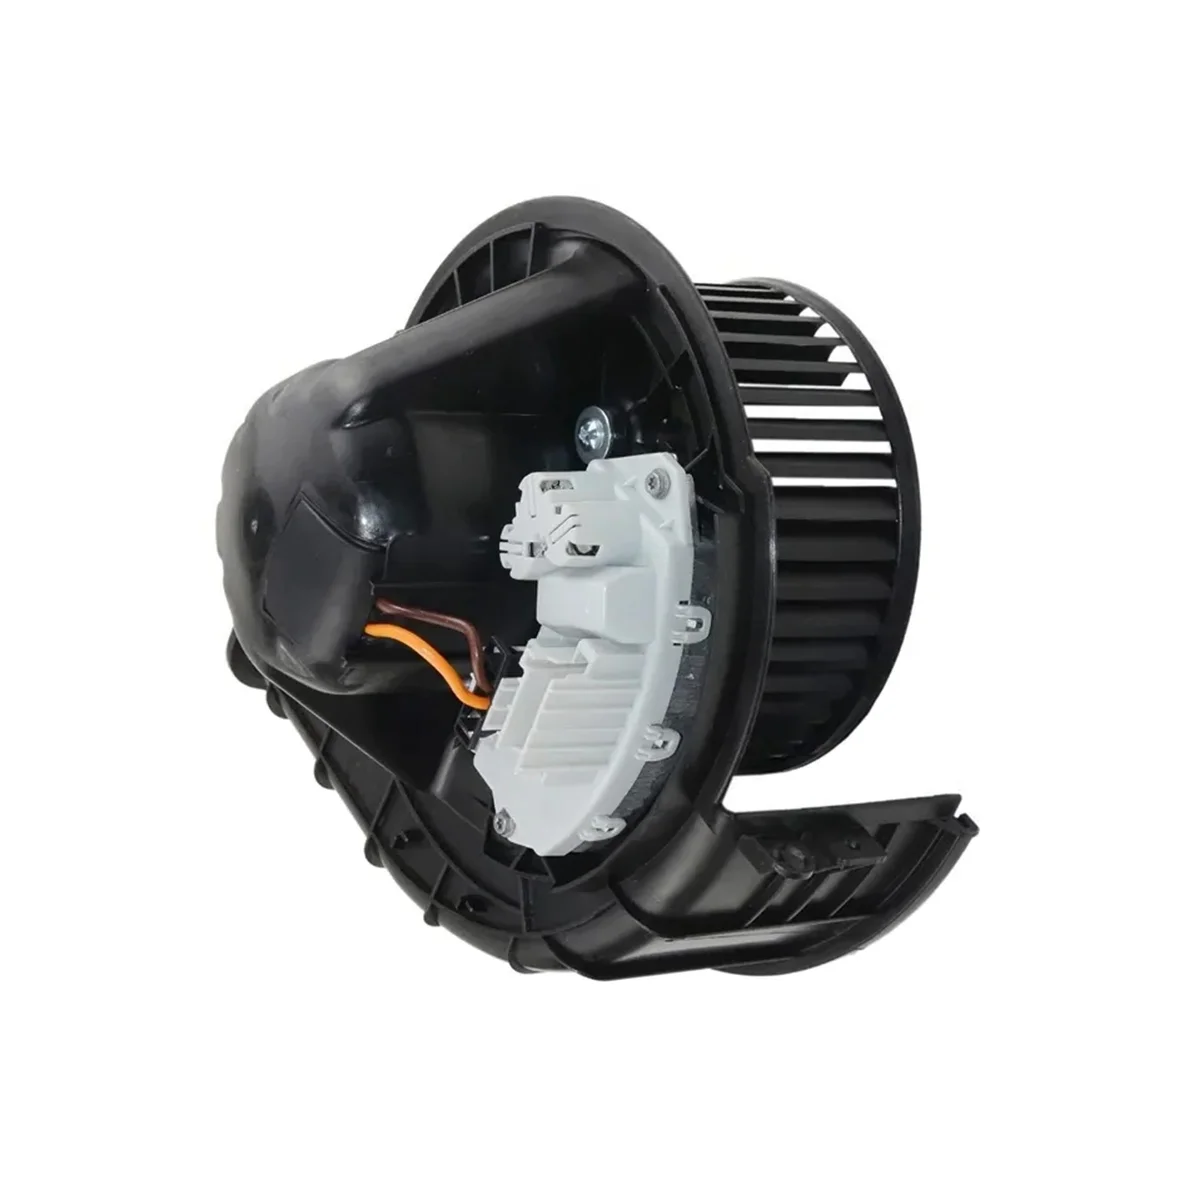 

A/C Blower Heater Motor with Fan Cage Front for BMW X5 X6 E70 E71 2007-2013 64116971108 64119245849 64119229658